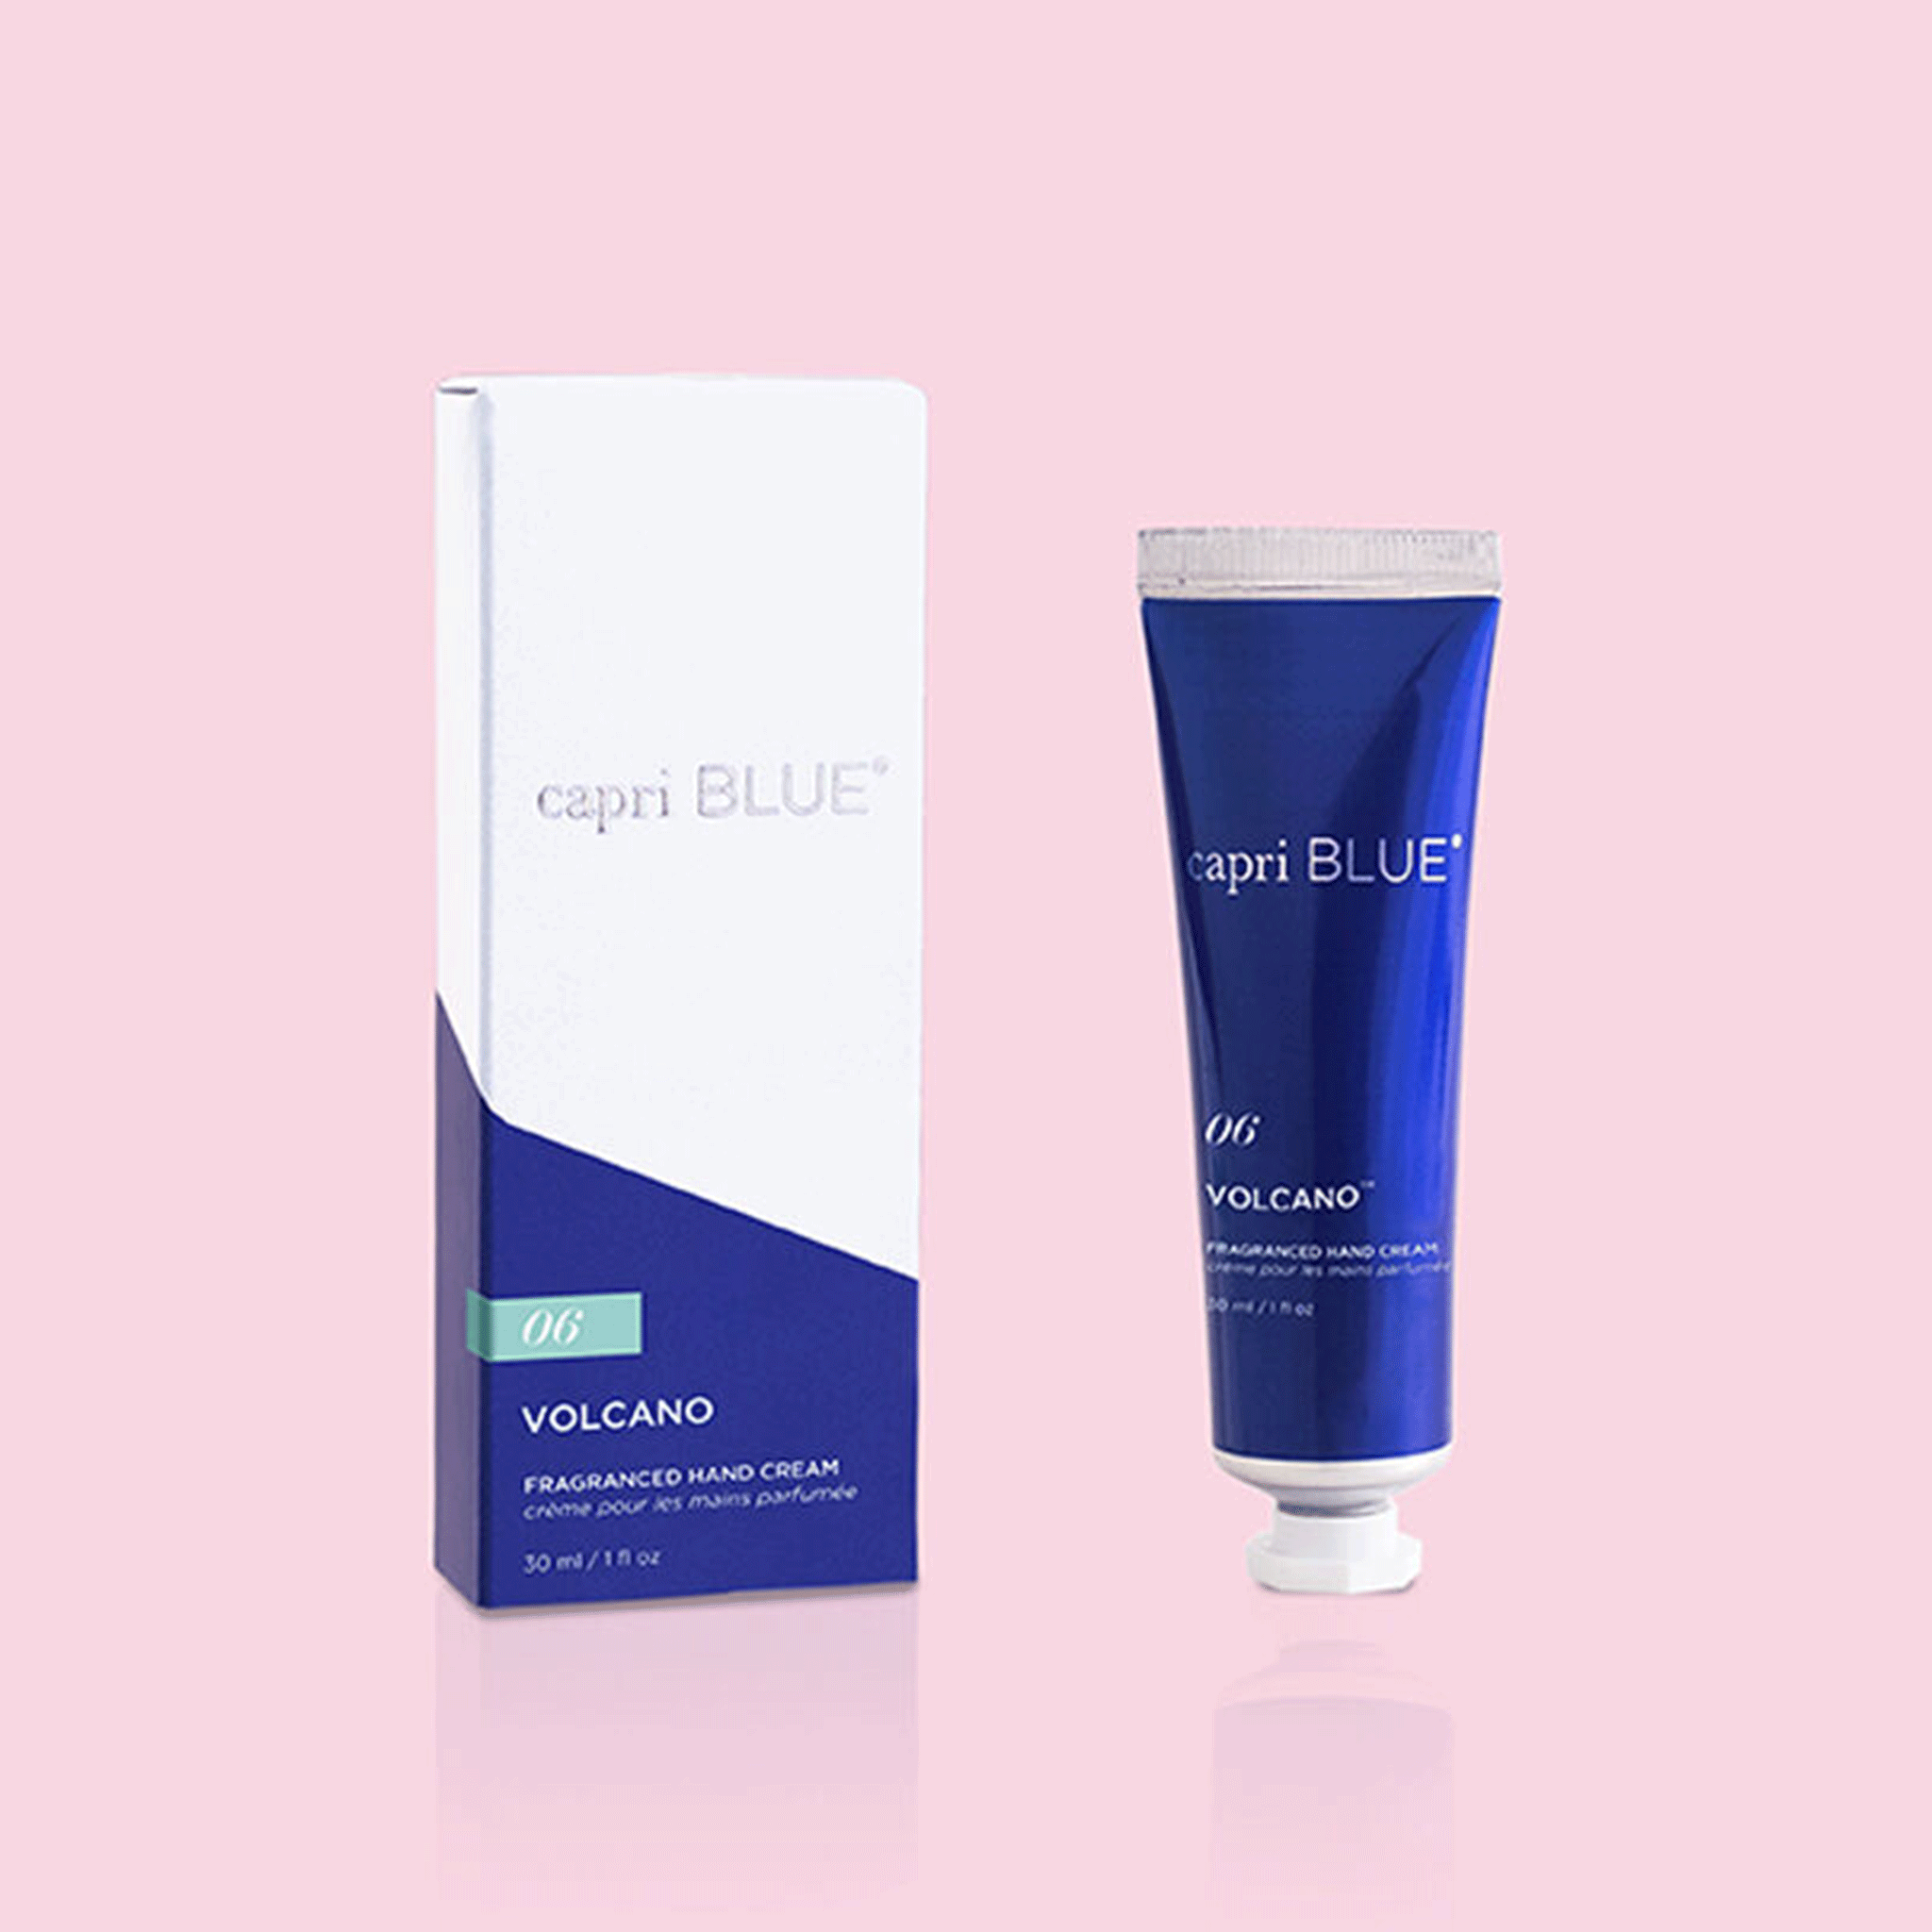 On a pink background is a blue bottle of hand cream with silver text that reads, "capri BLUE 06 Volcano".